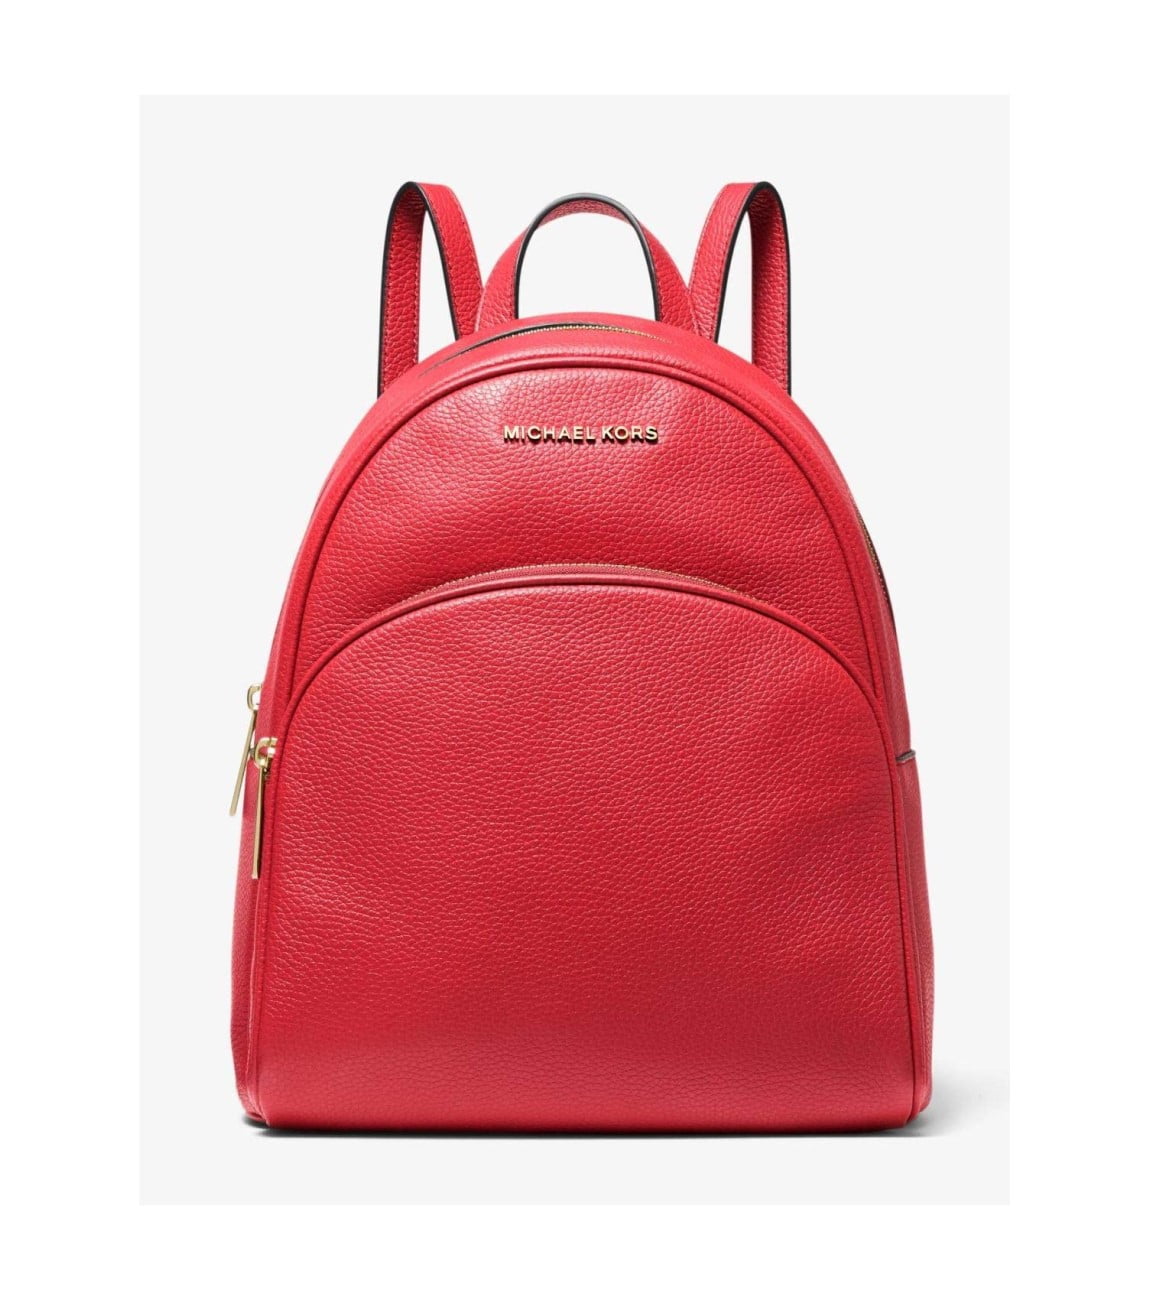 Michael Michael Kors Abbey Medium Leather Backpack 30S0Gayb6L Bright Red 